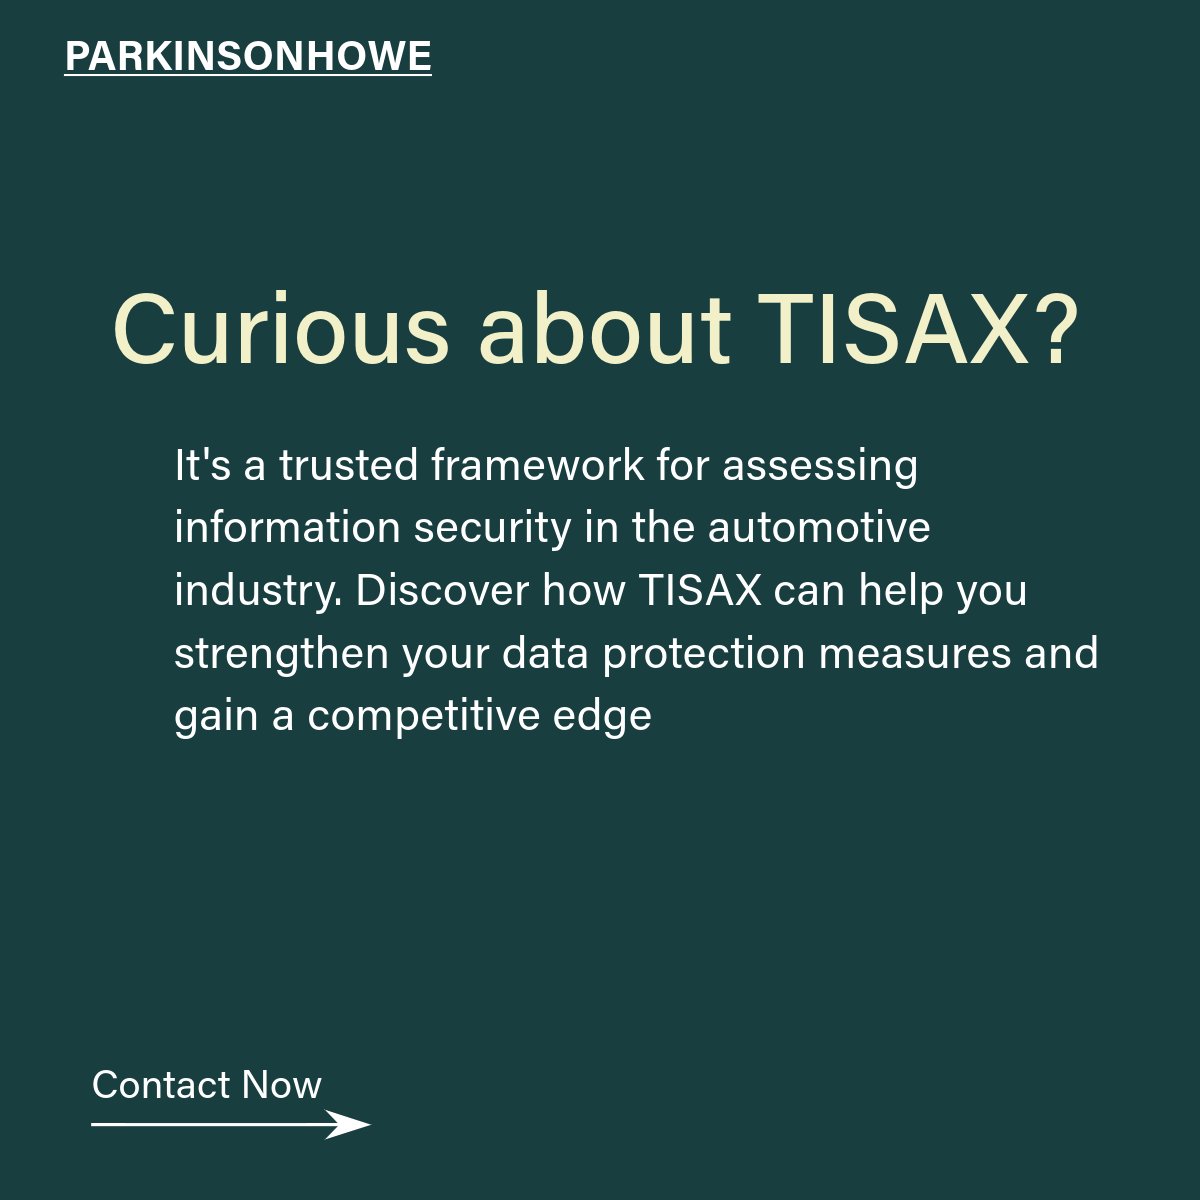 Looking to achieve ISO 27001, ISO 22301, or TISAX compliance? 

#ParkinsonHowe can guide you through the process, ensuring robust information security and business continuity. Strengthen your organization with our expertise. #ISO27001 #ISO22301 #TISAX #B2B #smeuk